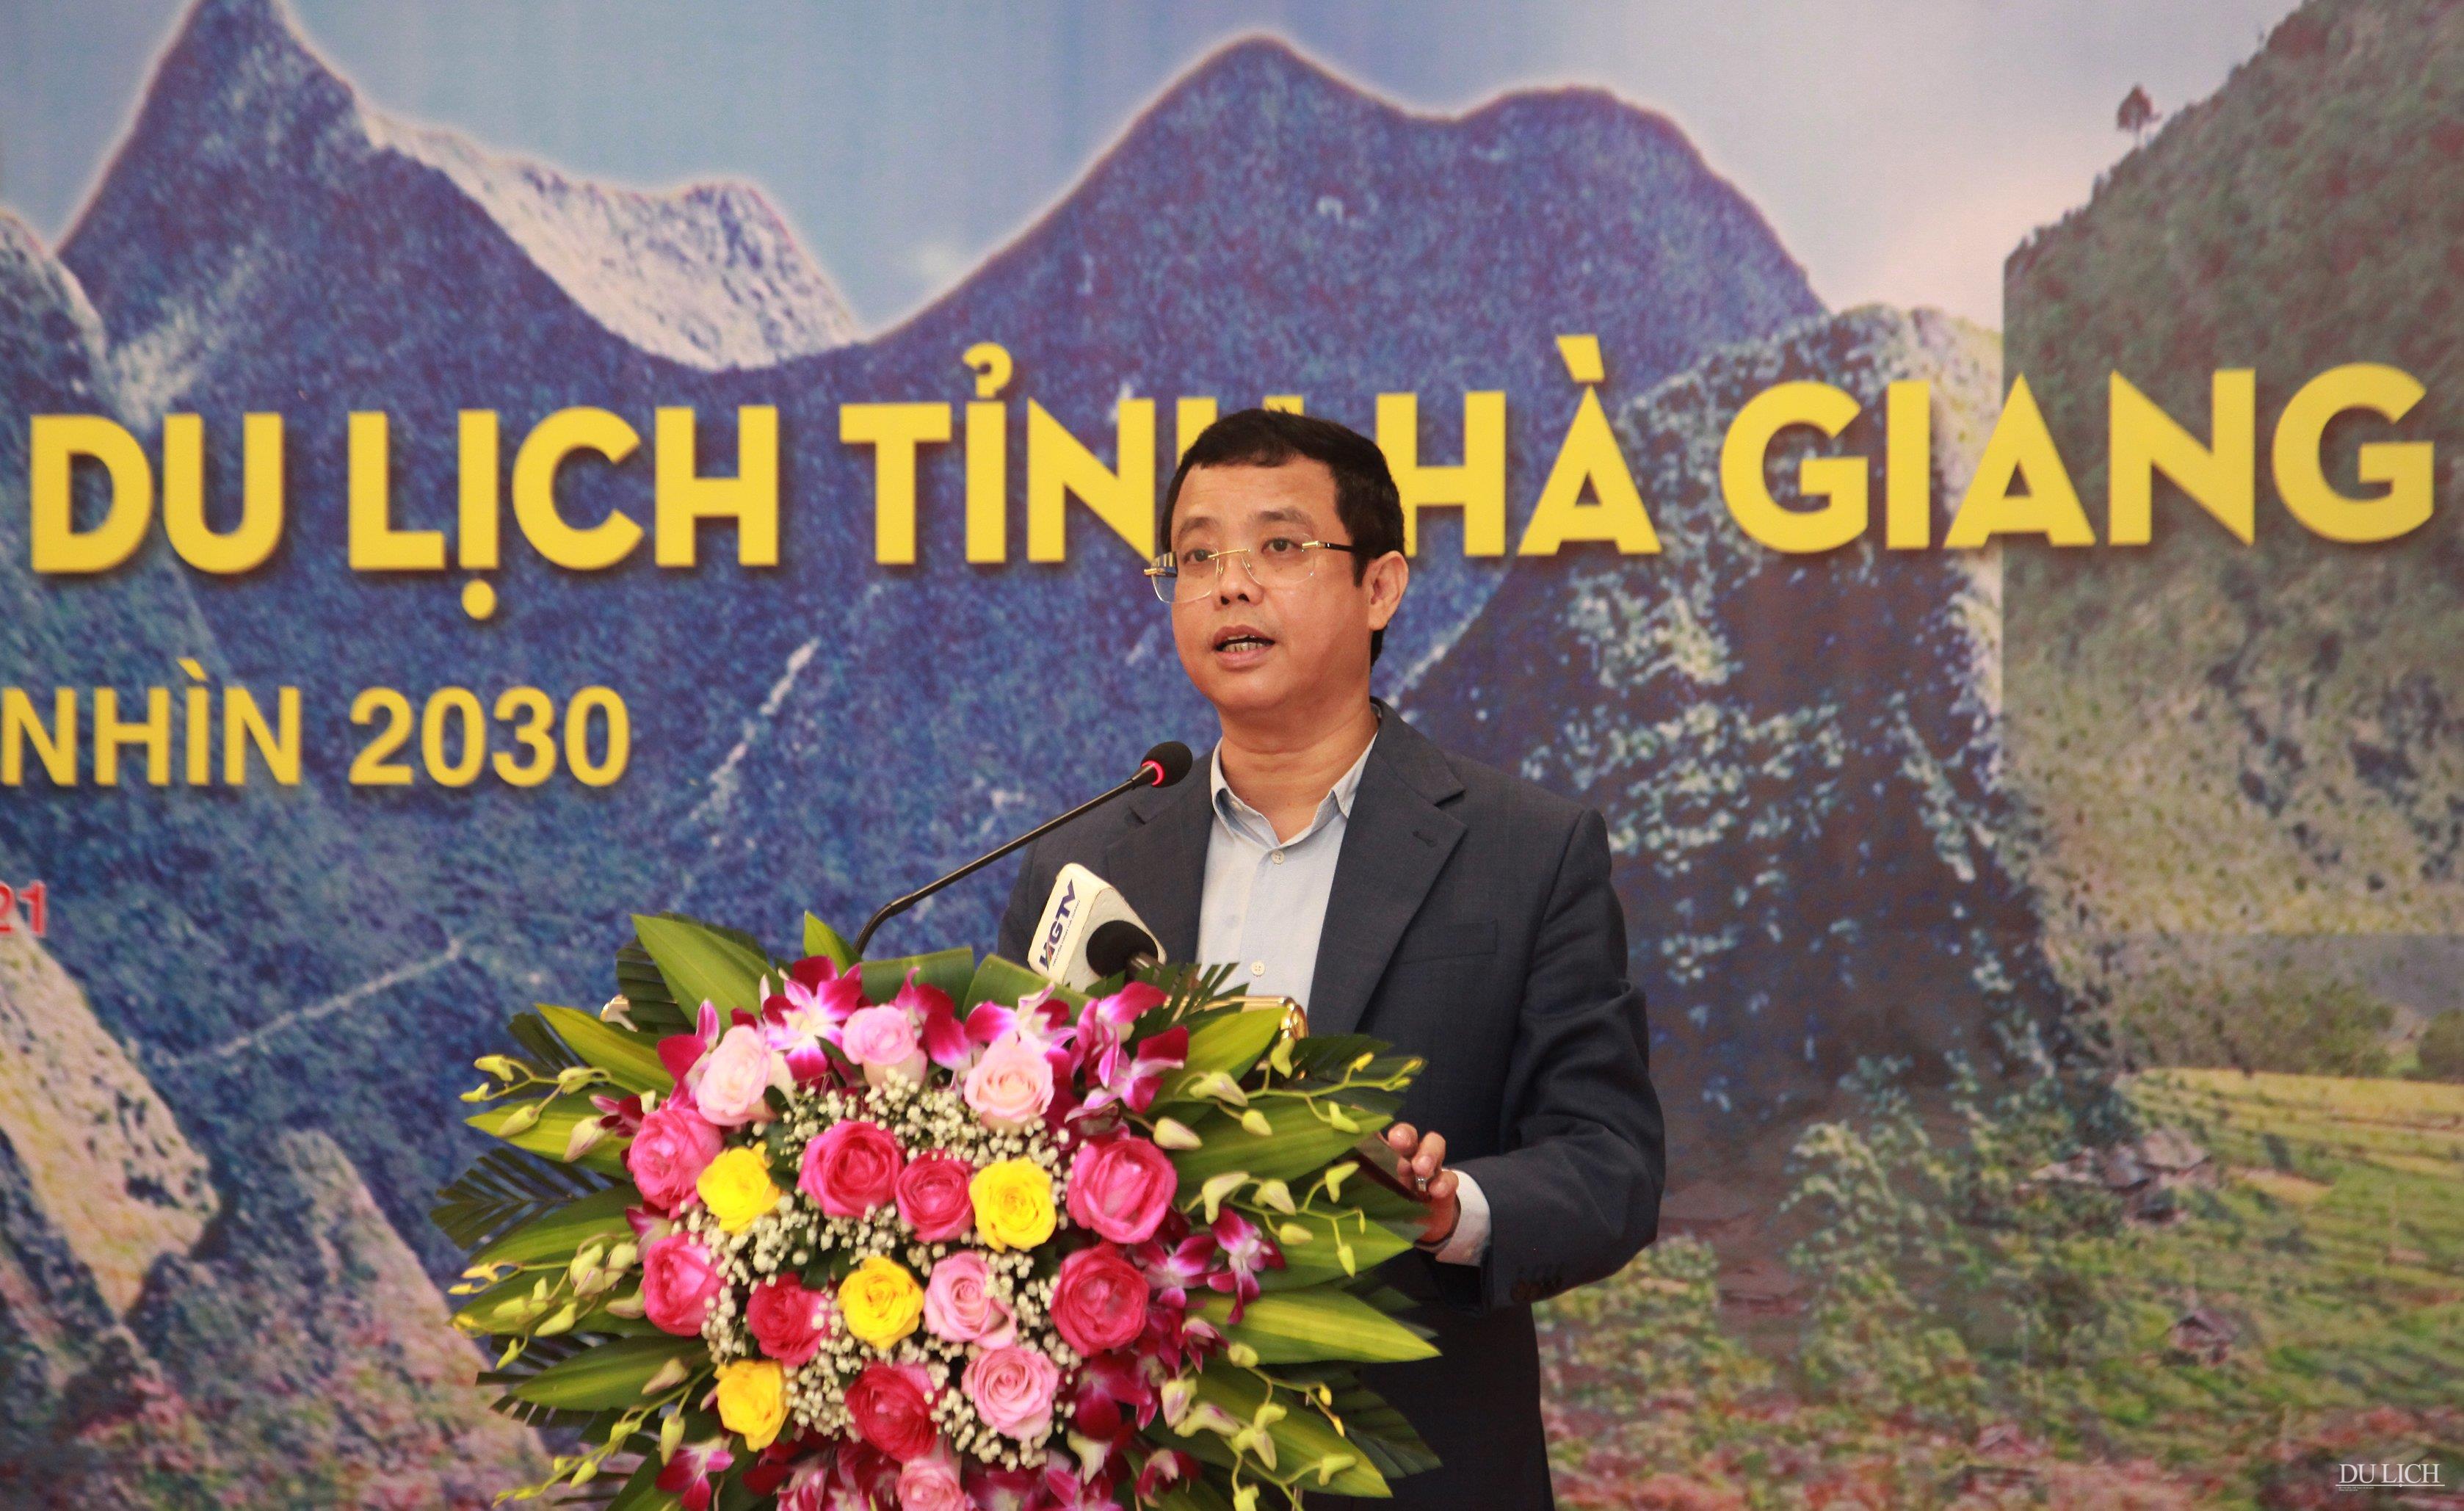 Key solutions can help boosting tourism development in Ha Giang